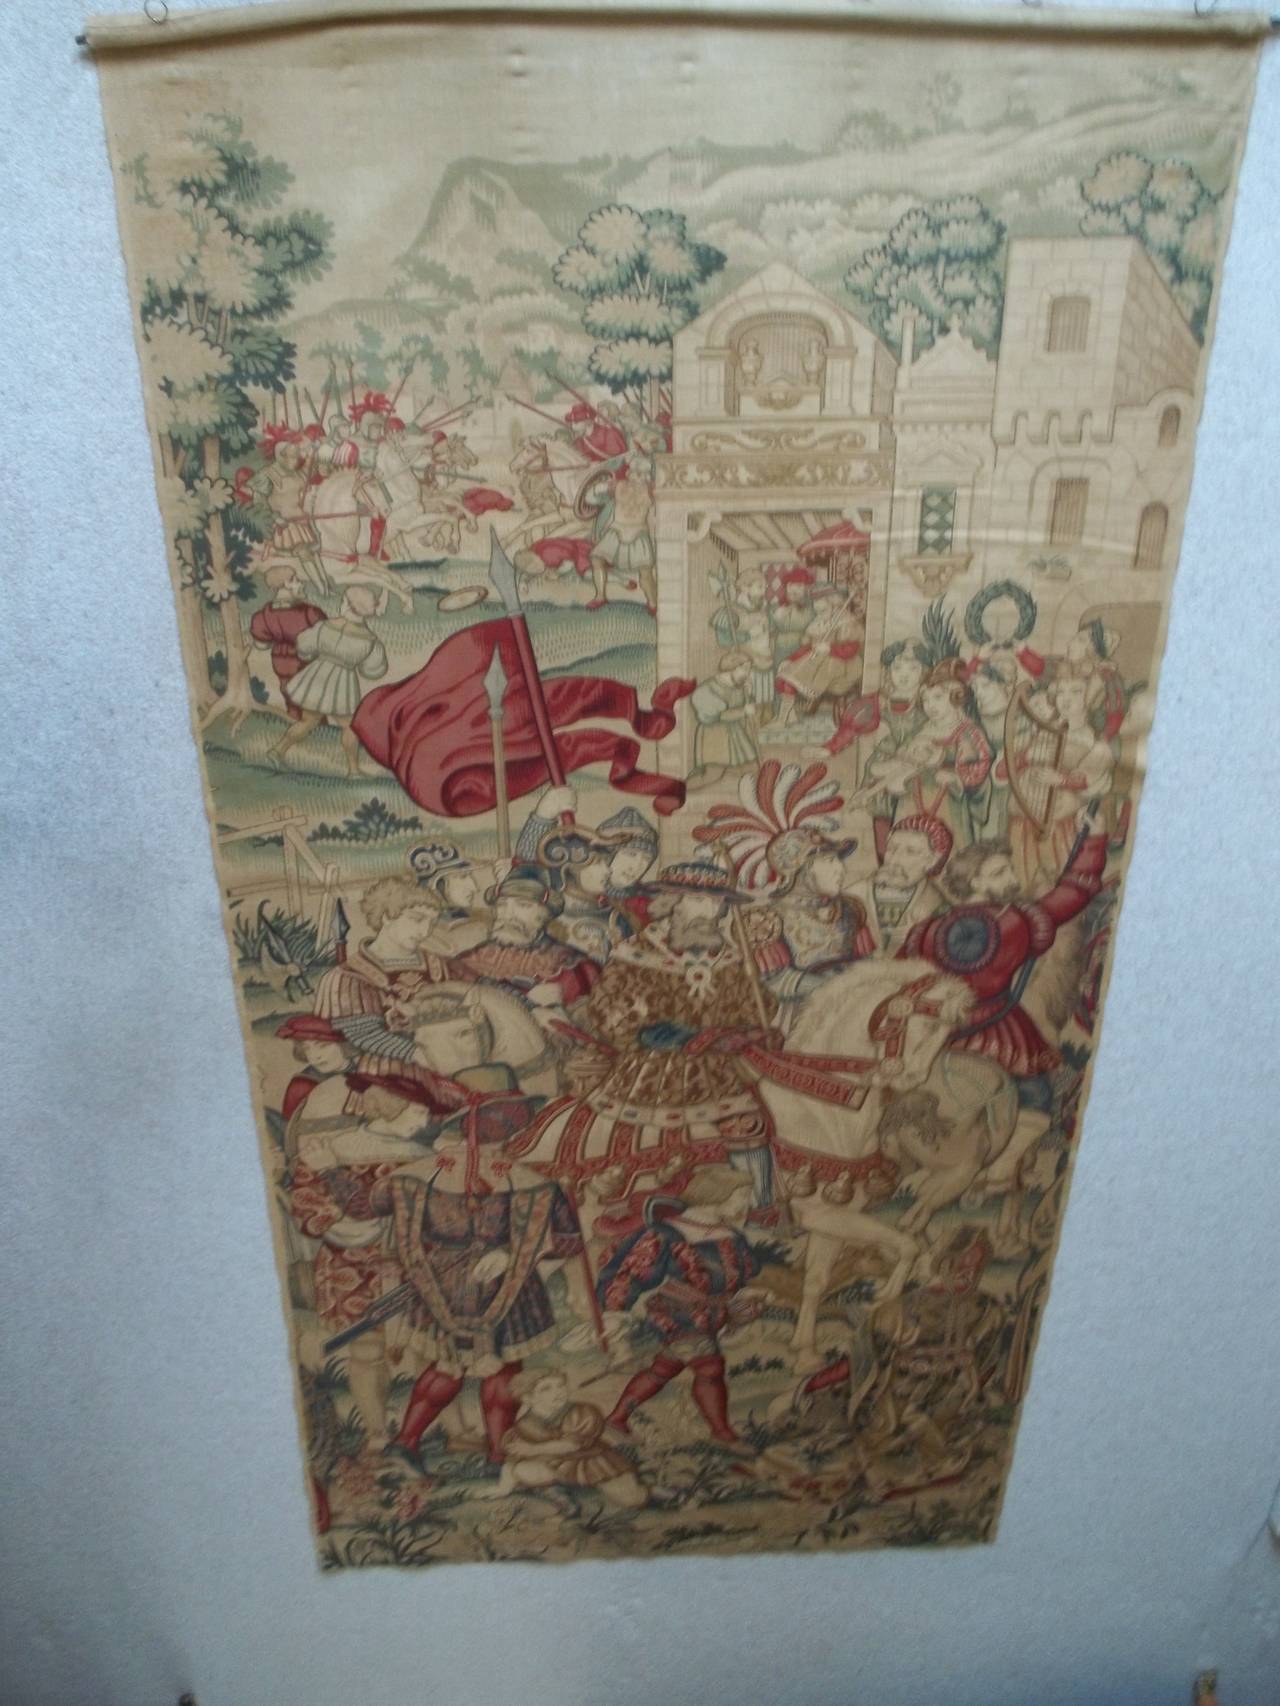 This is a superb, distinctive and very large French Wall Hanging or Tapestry.

The art work is dyed or printed on a hessian style fabric and emulates the beautifully crafted Aubusson tapestries with rich and vibrant colours, including blood reds,